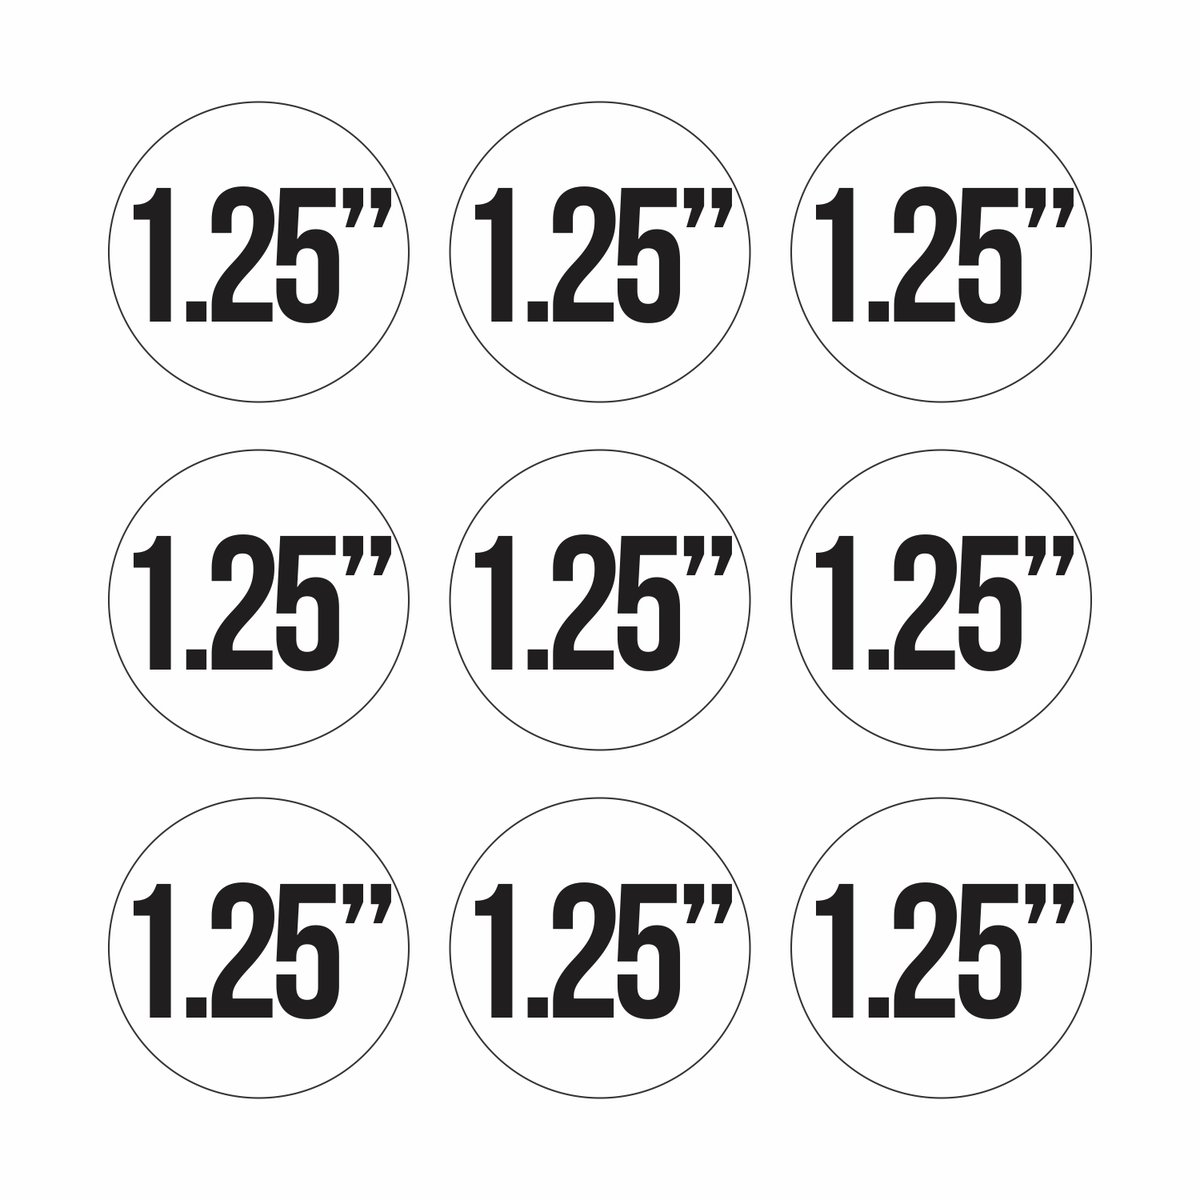 Image of 1.25" Buttons